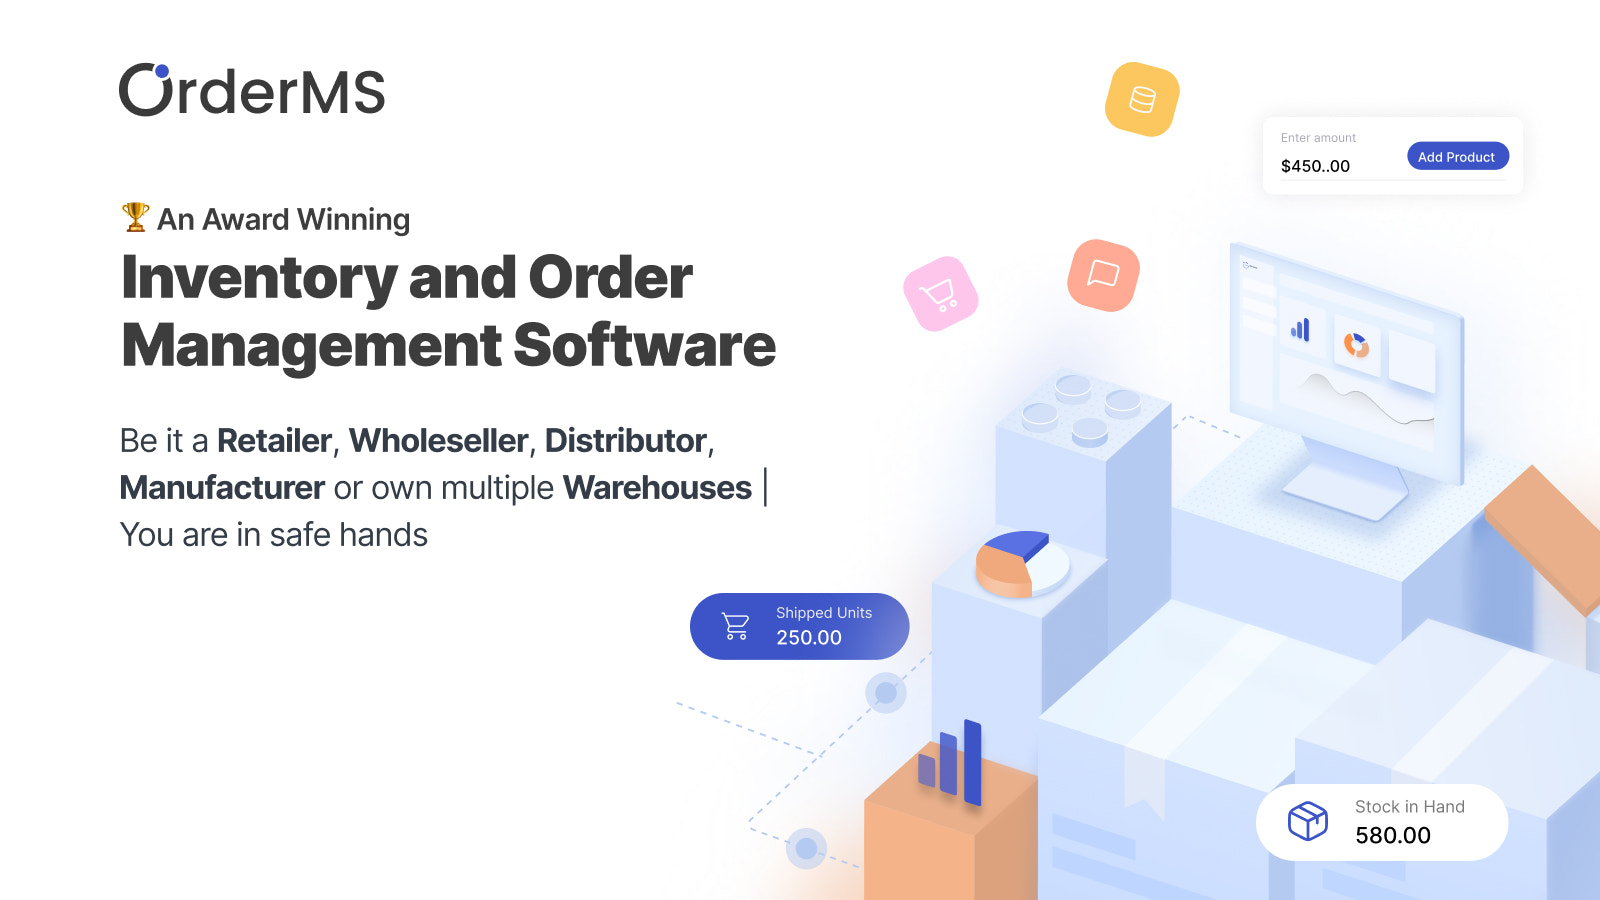 OrderMS - Streamlining orders and inventory